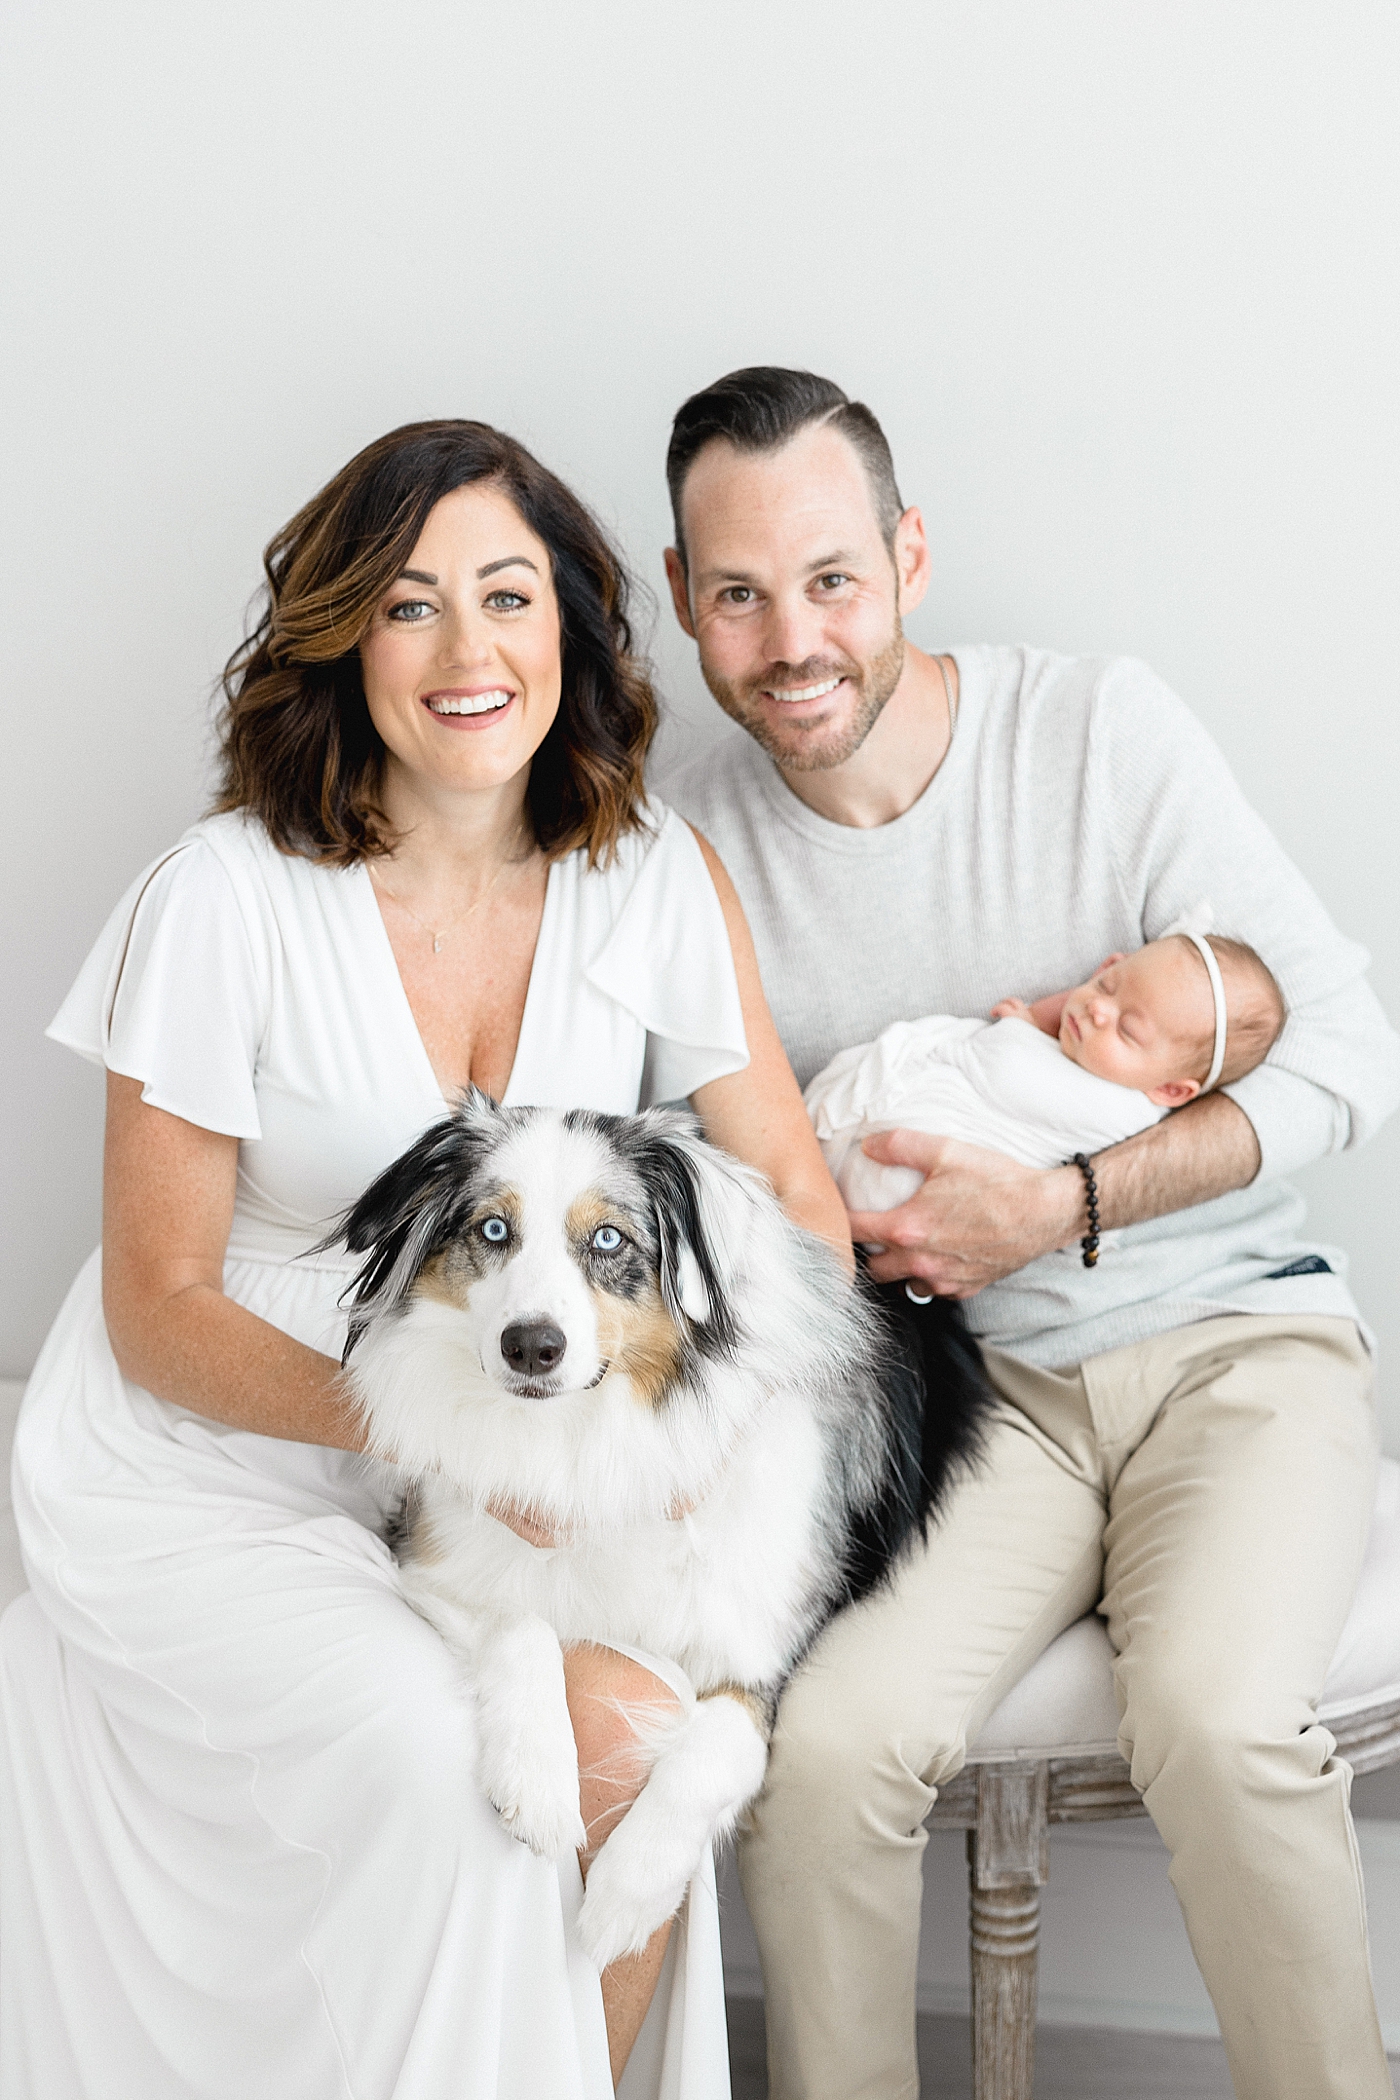 Newborn session with pets in the studio. Photo by Brittany Elise Photography.